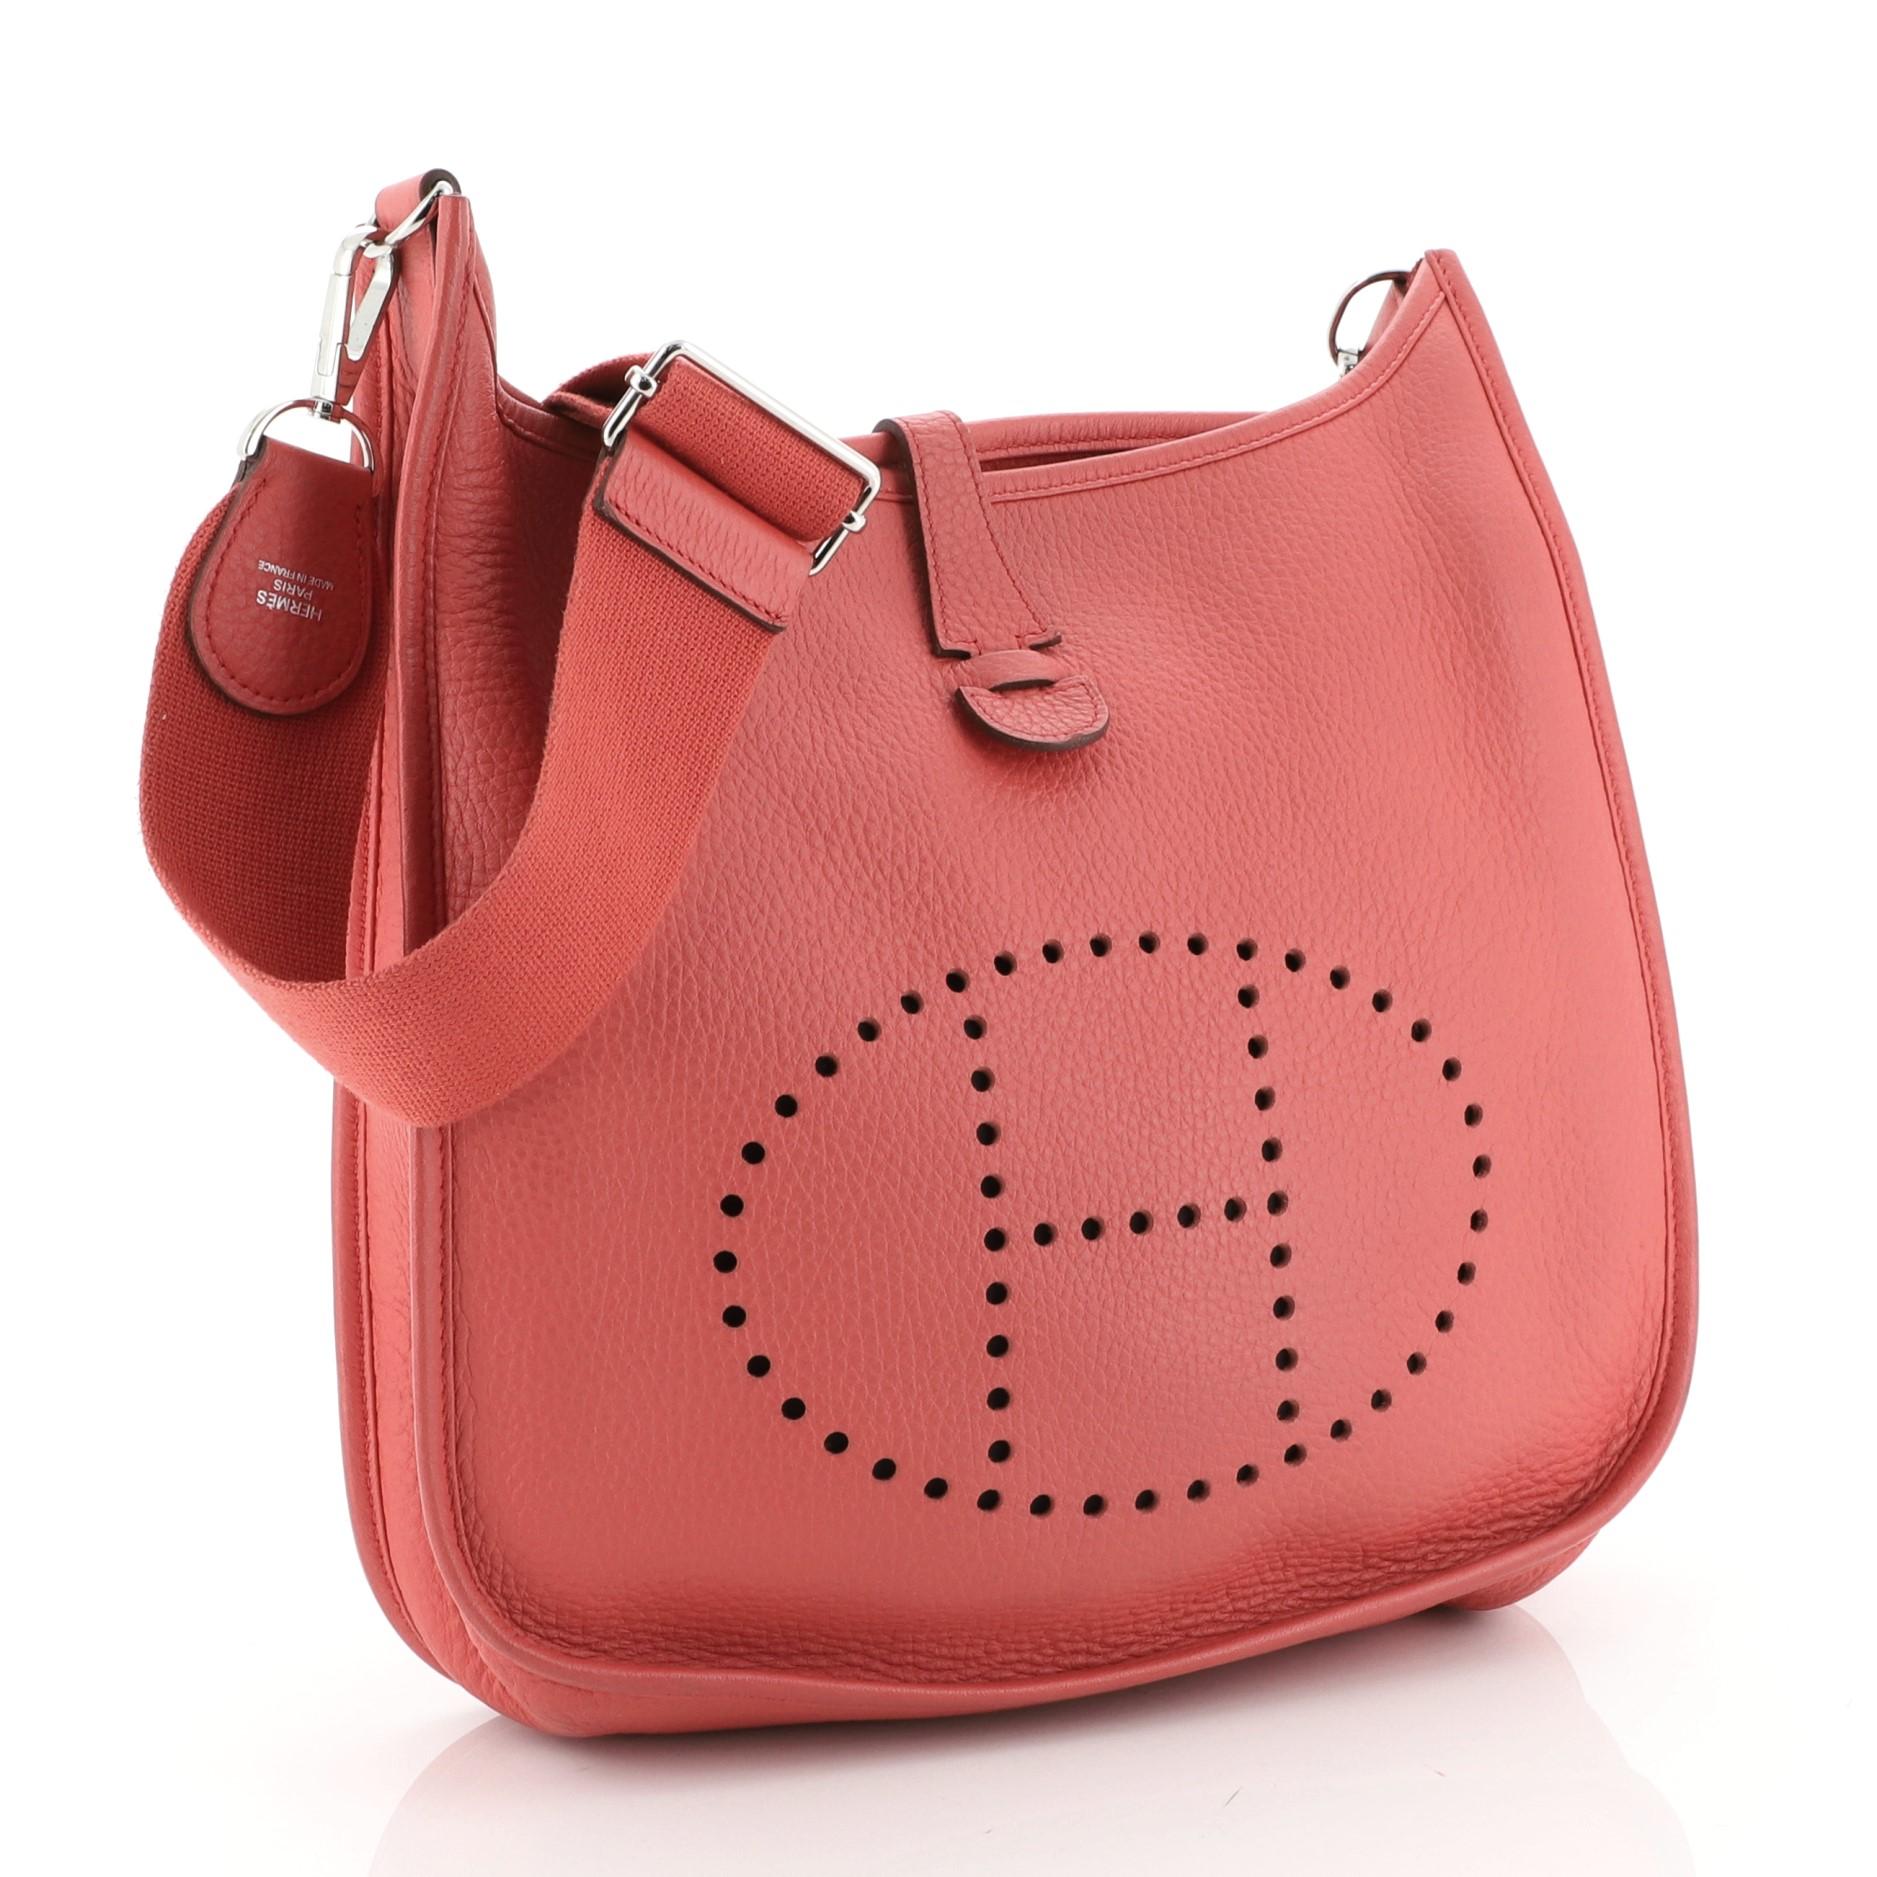 This Hermes Evelyne Crossbody Gen III Clemence PM, crafted in Bougainvillier Clemence leather, features perforated H design at the front, accessible back pocket, textile shoulder strap, and palladium hardware. It opens to a Bougainvillier raw